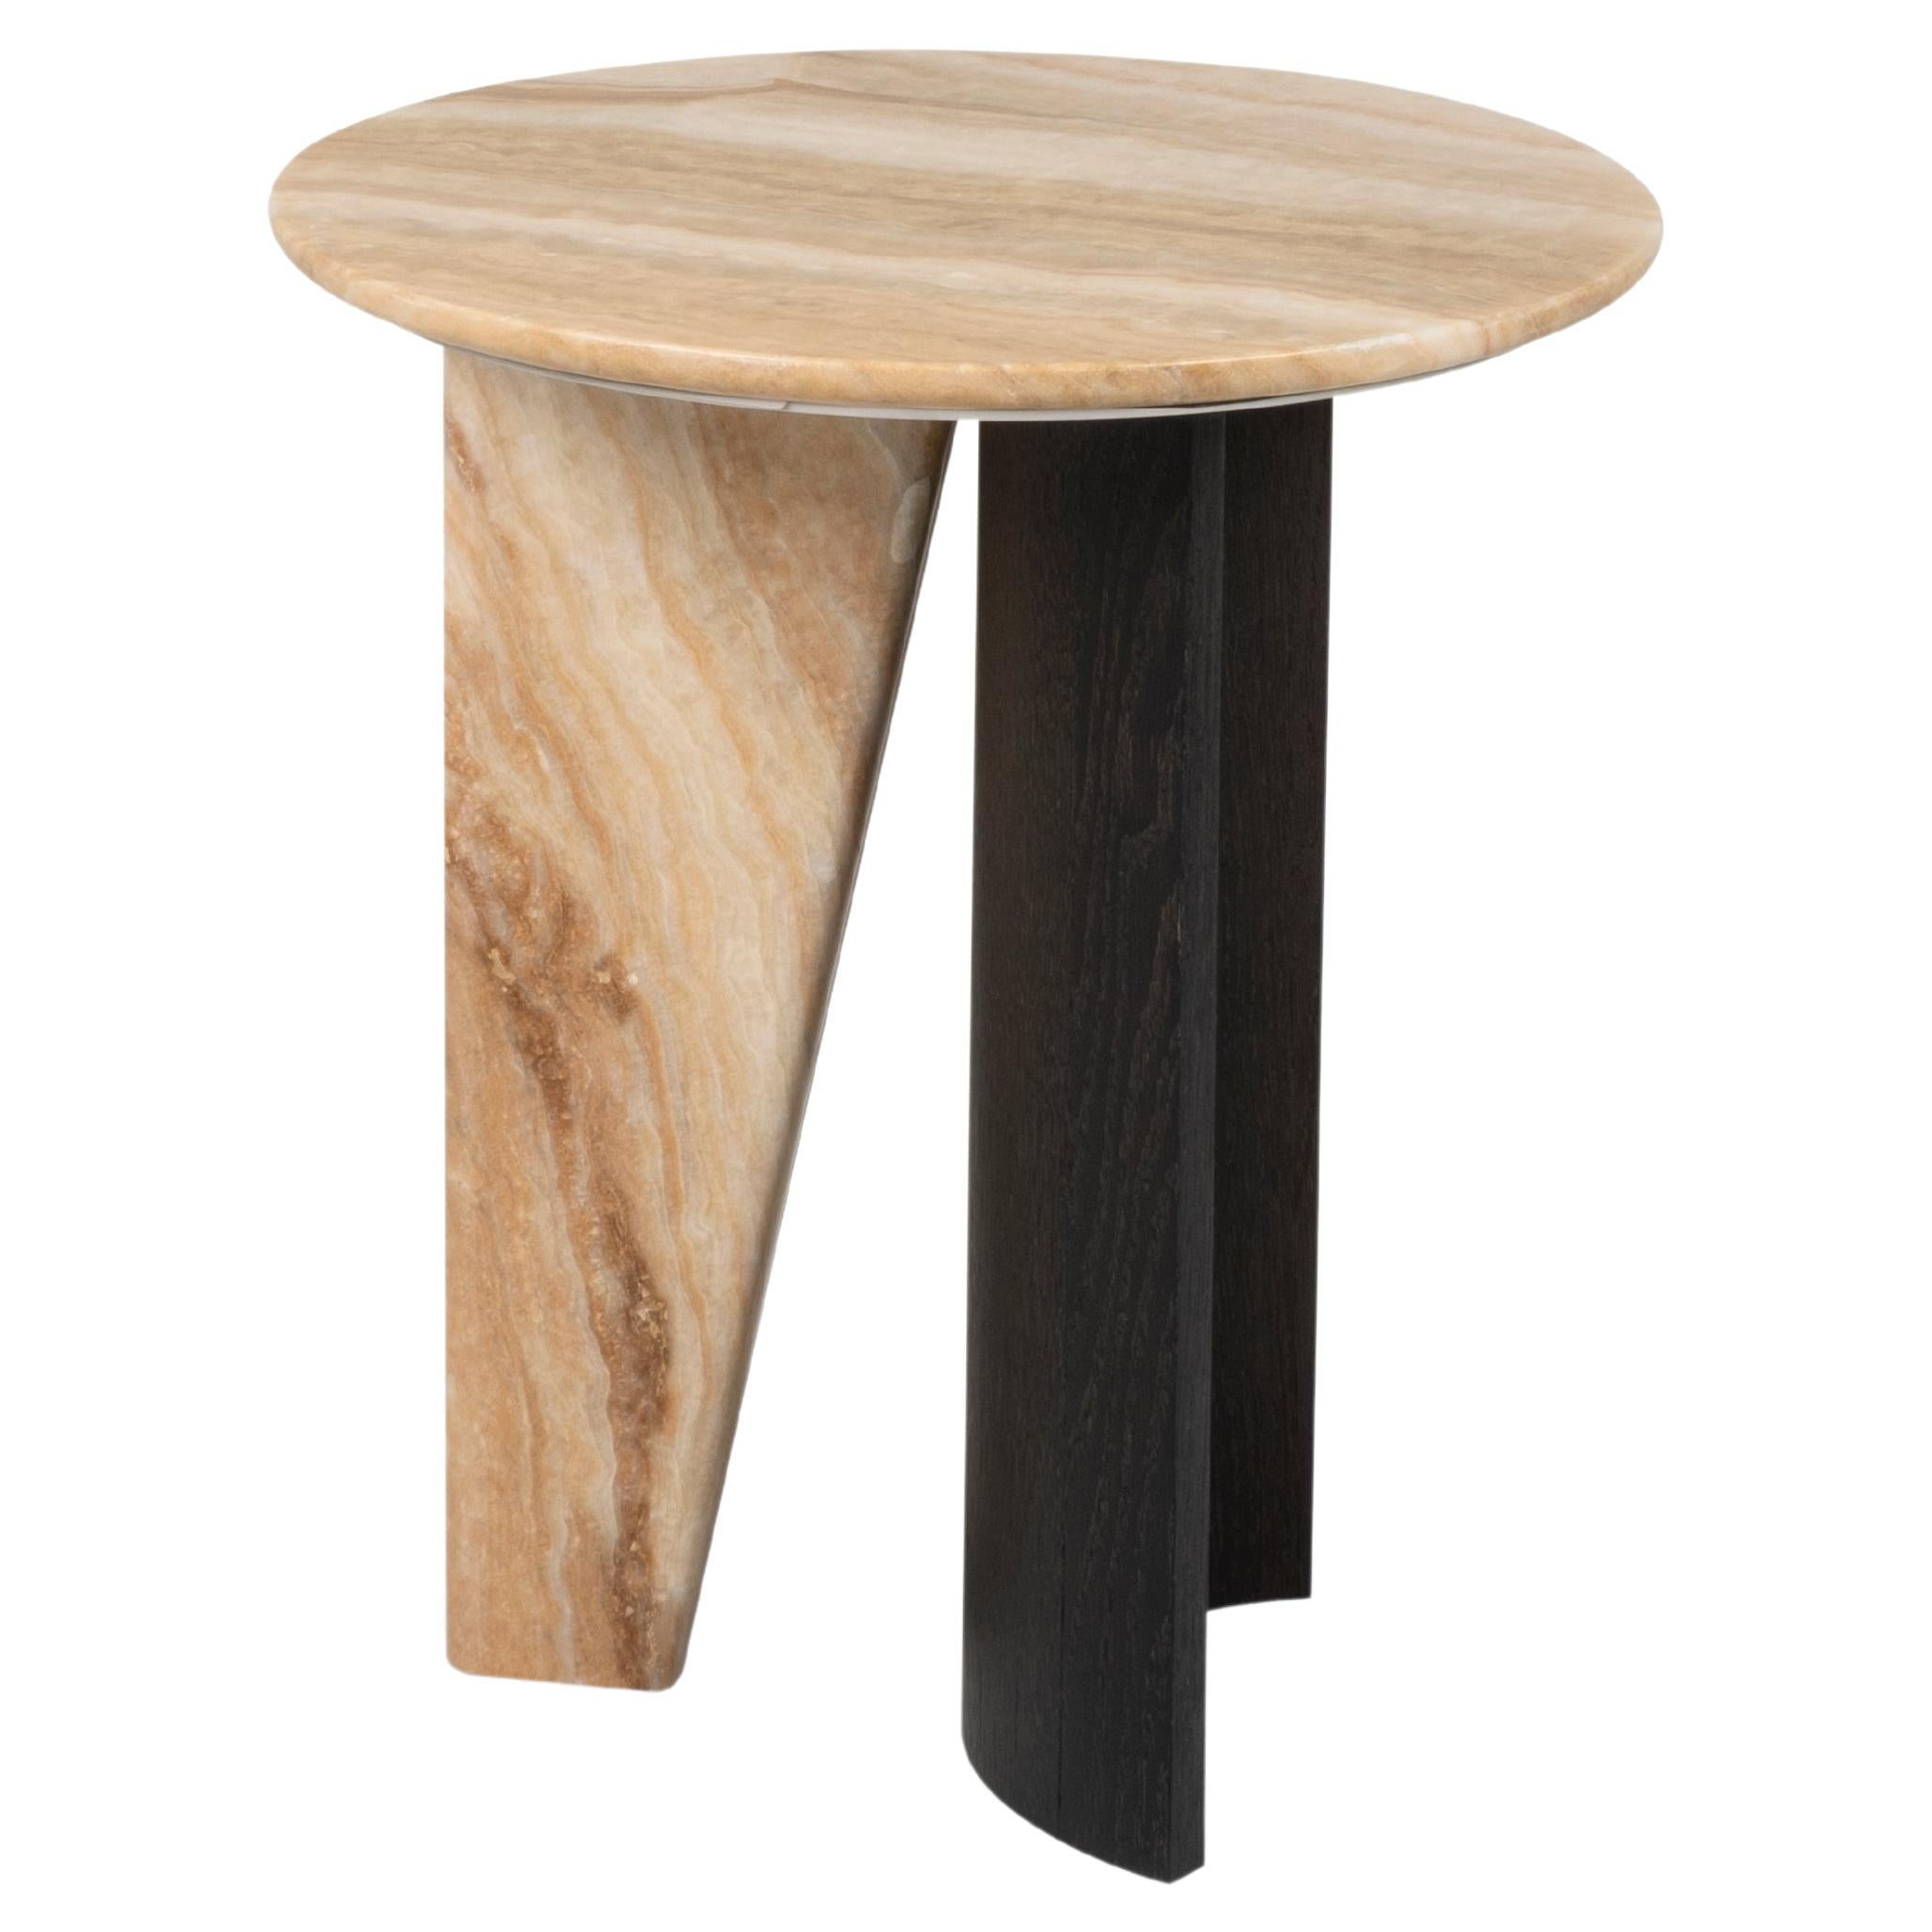 Modern Foice Side Table Onyx Stone Handmade in Portugal by Greenapple